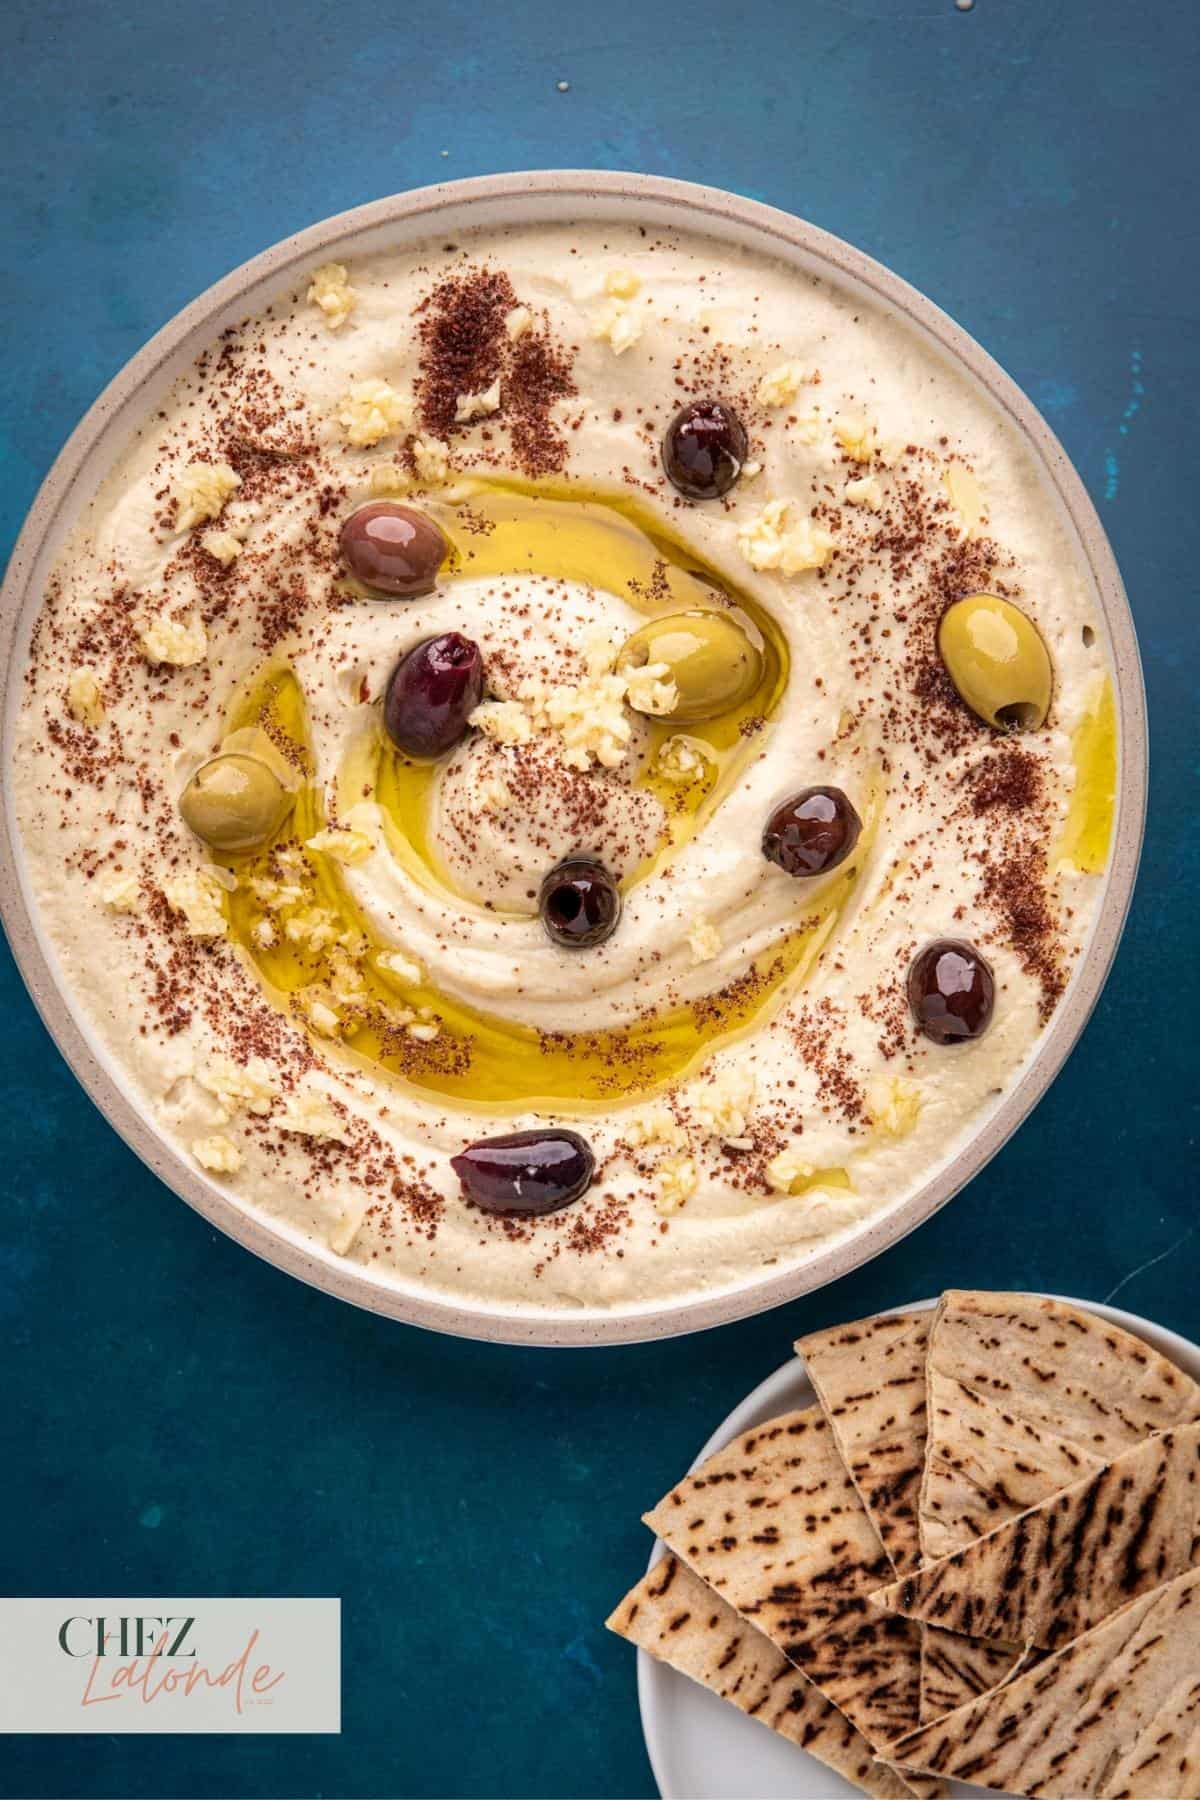 A bowl of hummus with slices of pita bread.